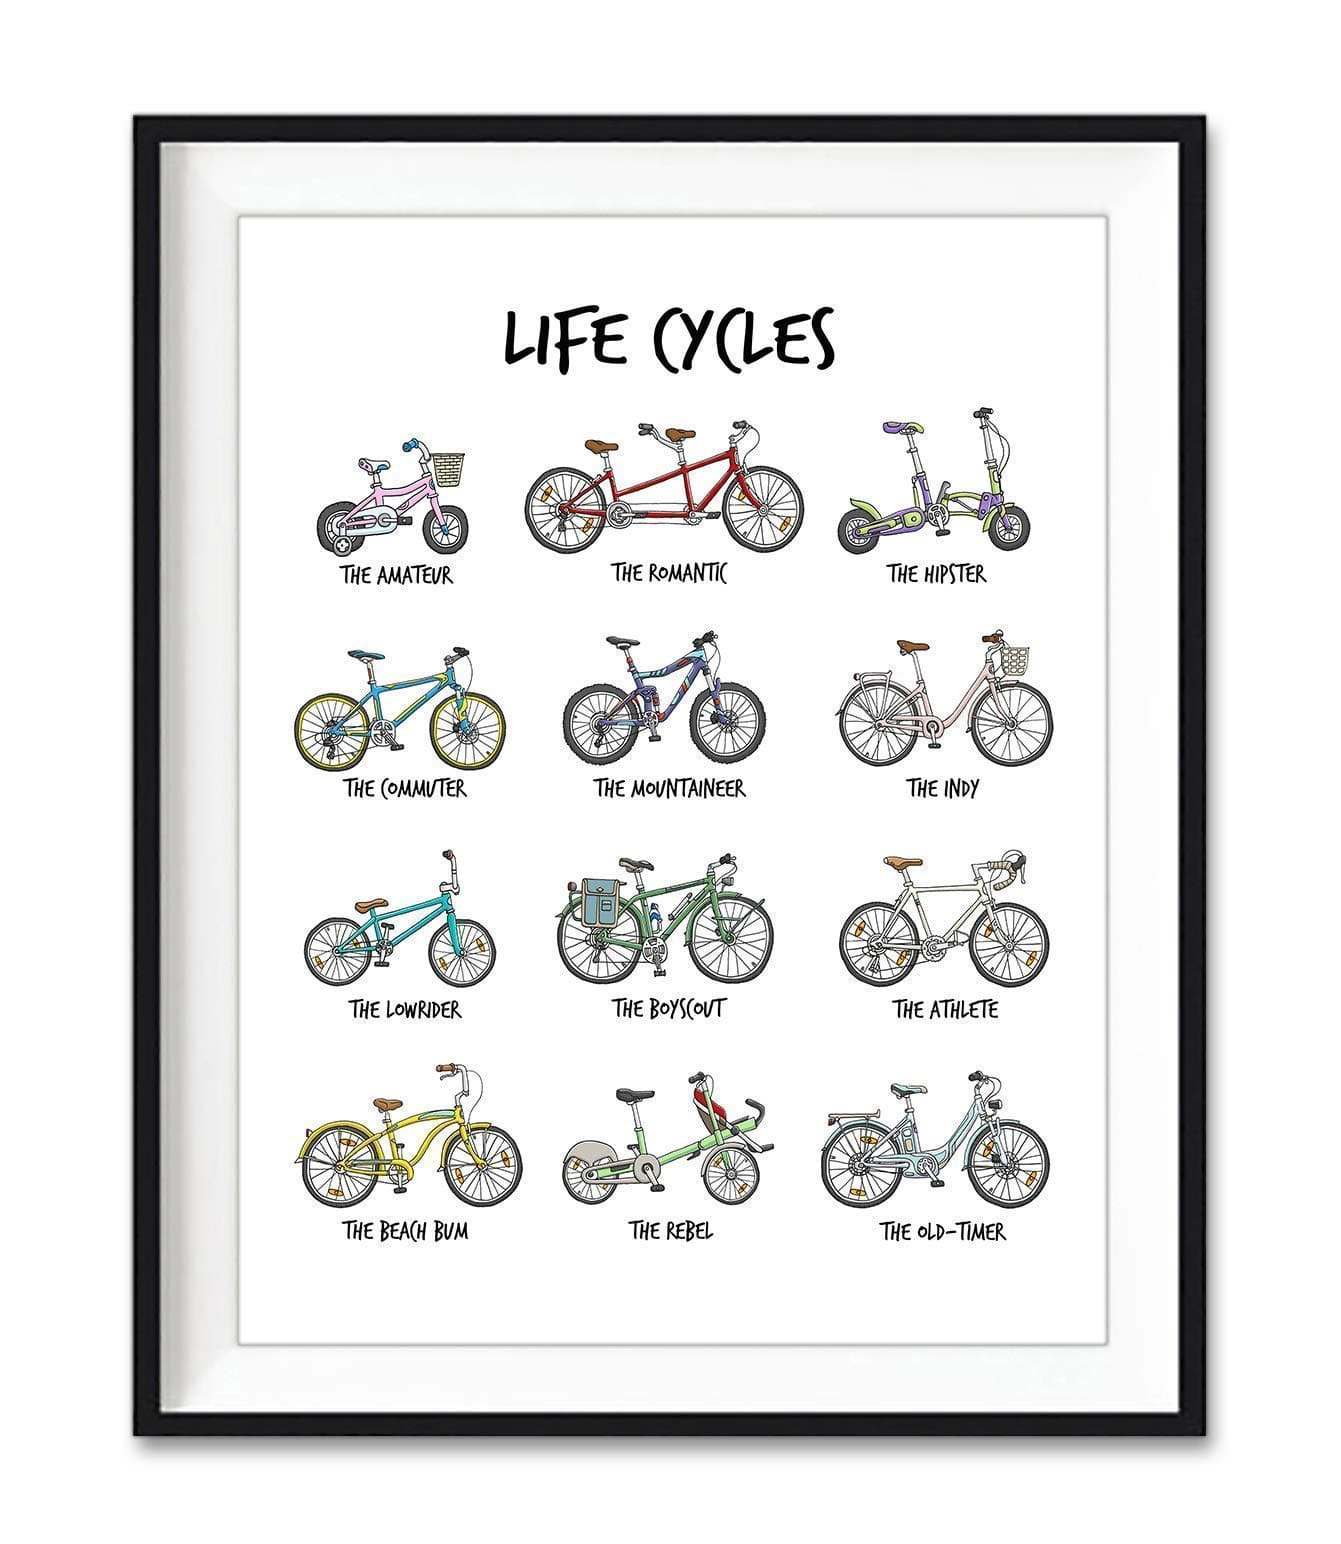 Cycle-Lover-Life-Cycle-Types-Of-Cycle-The-Amateur-The-Romantic-The-Hipster-1.jpg